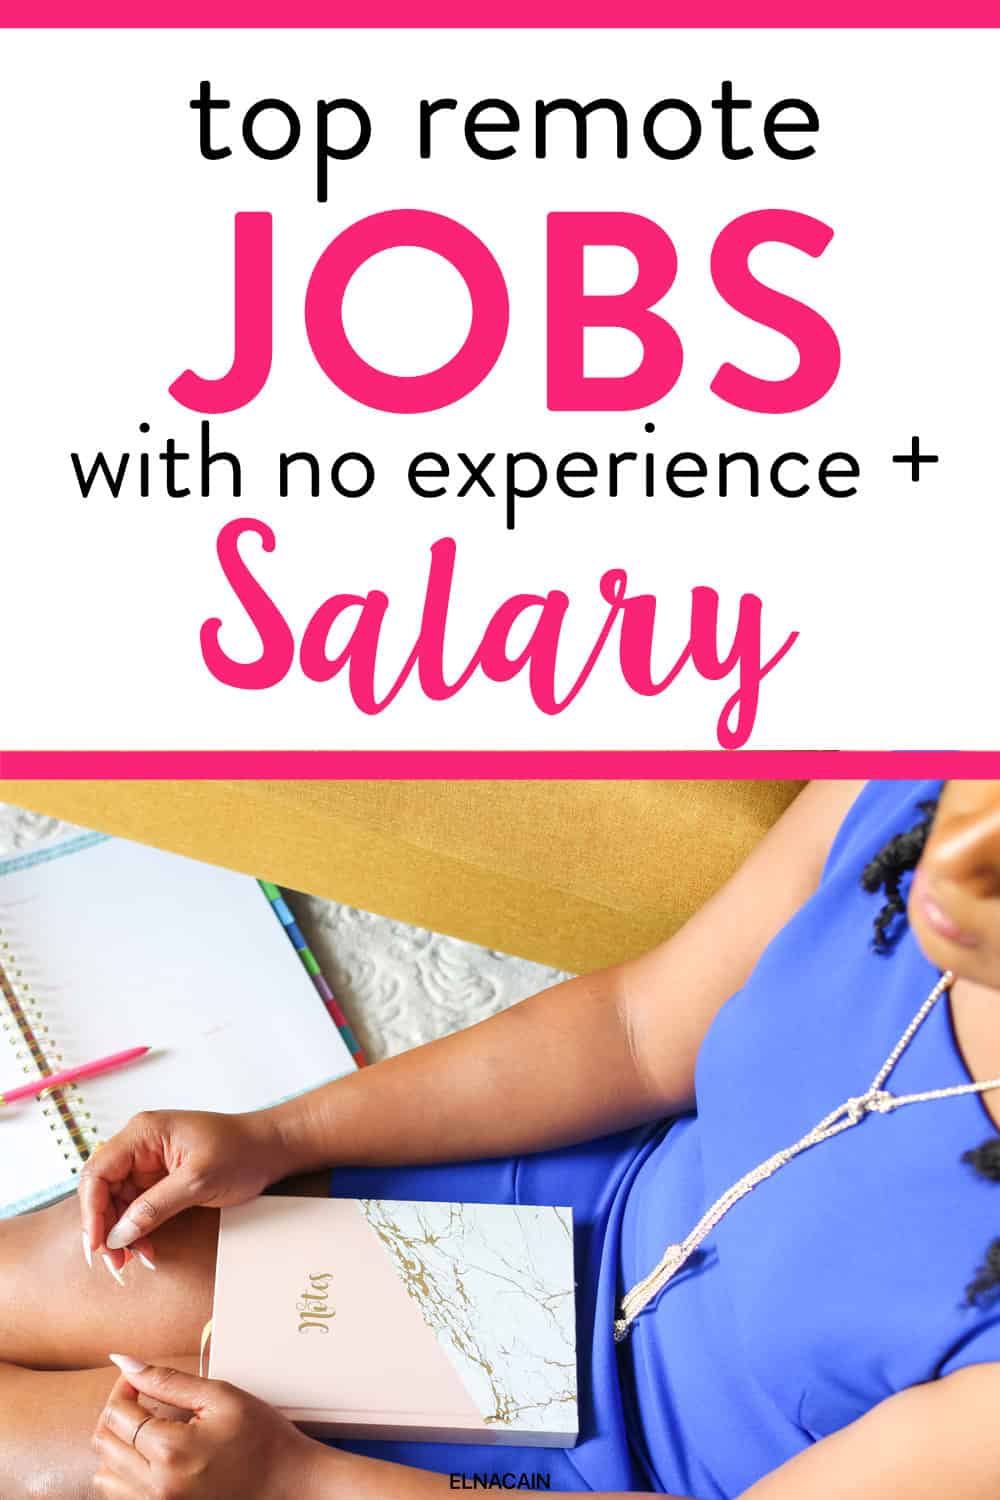 15 Top Remote Jobs With No Experience + Monthly Salary Elna Cain